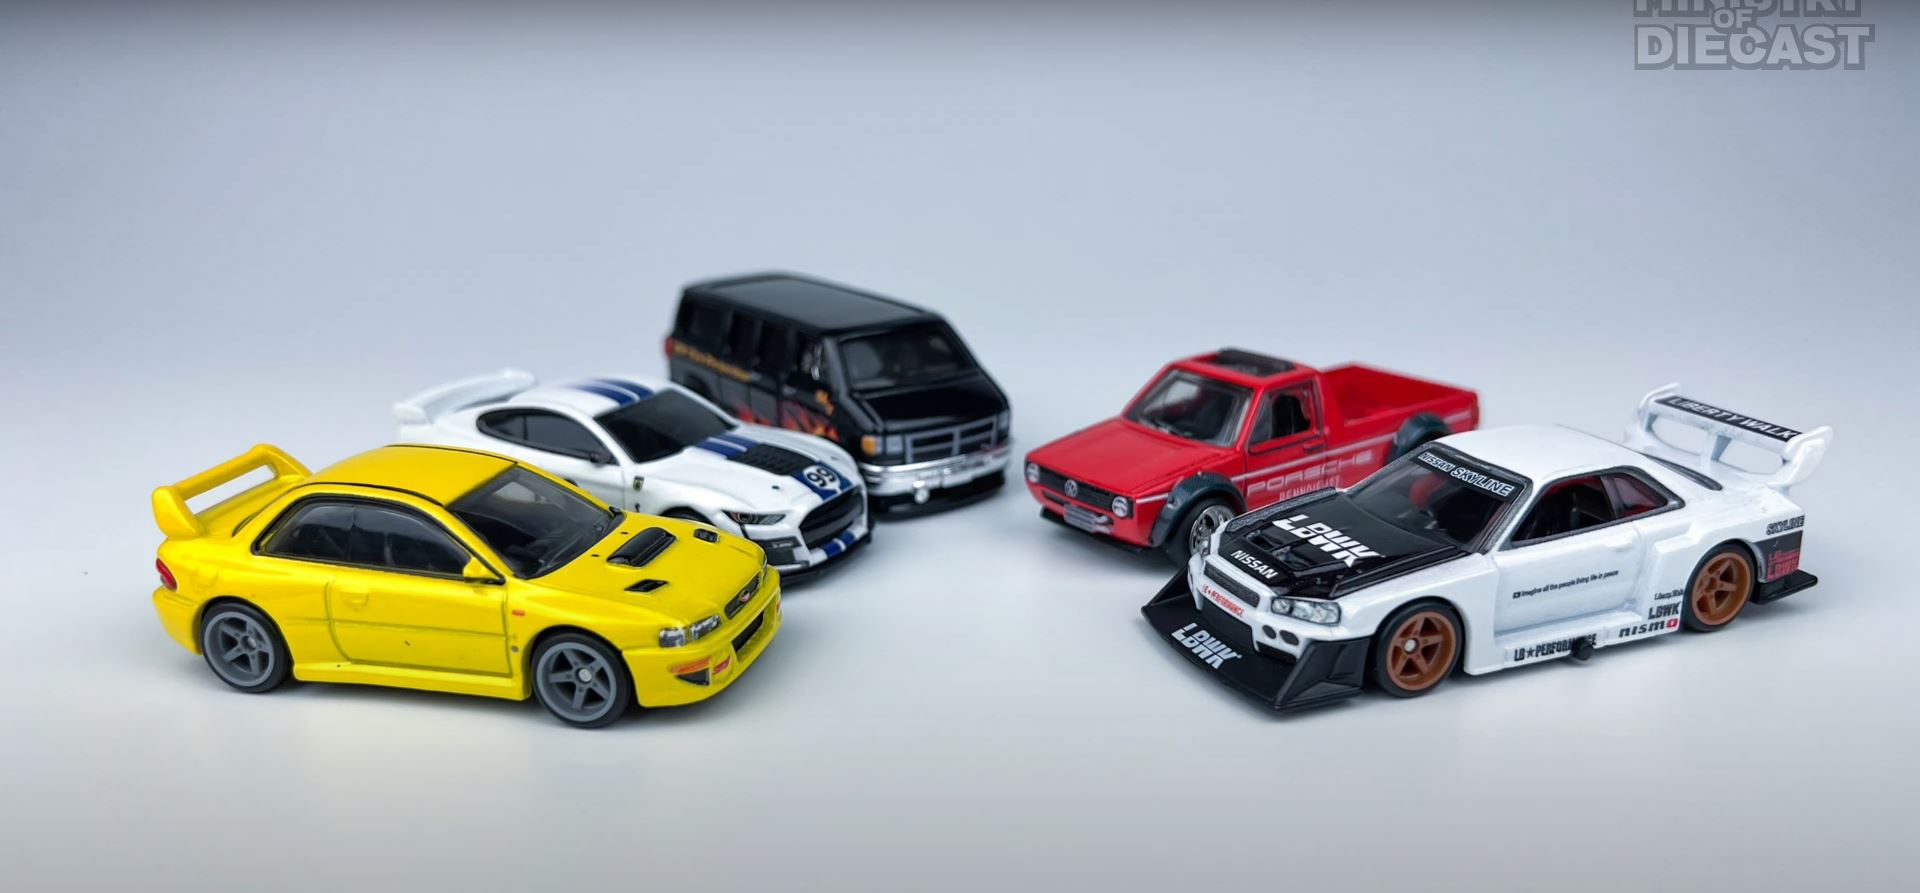 2023 Hot Wheels Boulevard Mix 1 Promises Five More Exciting Cars to ...